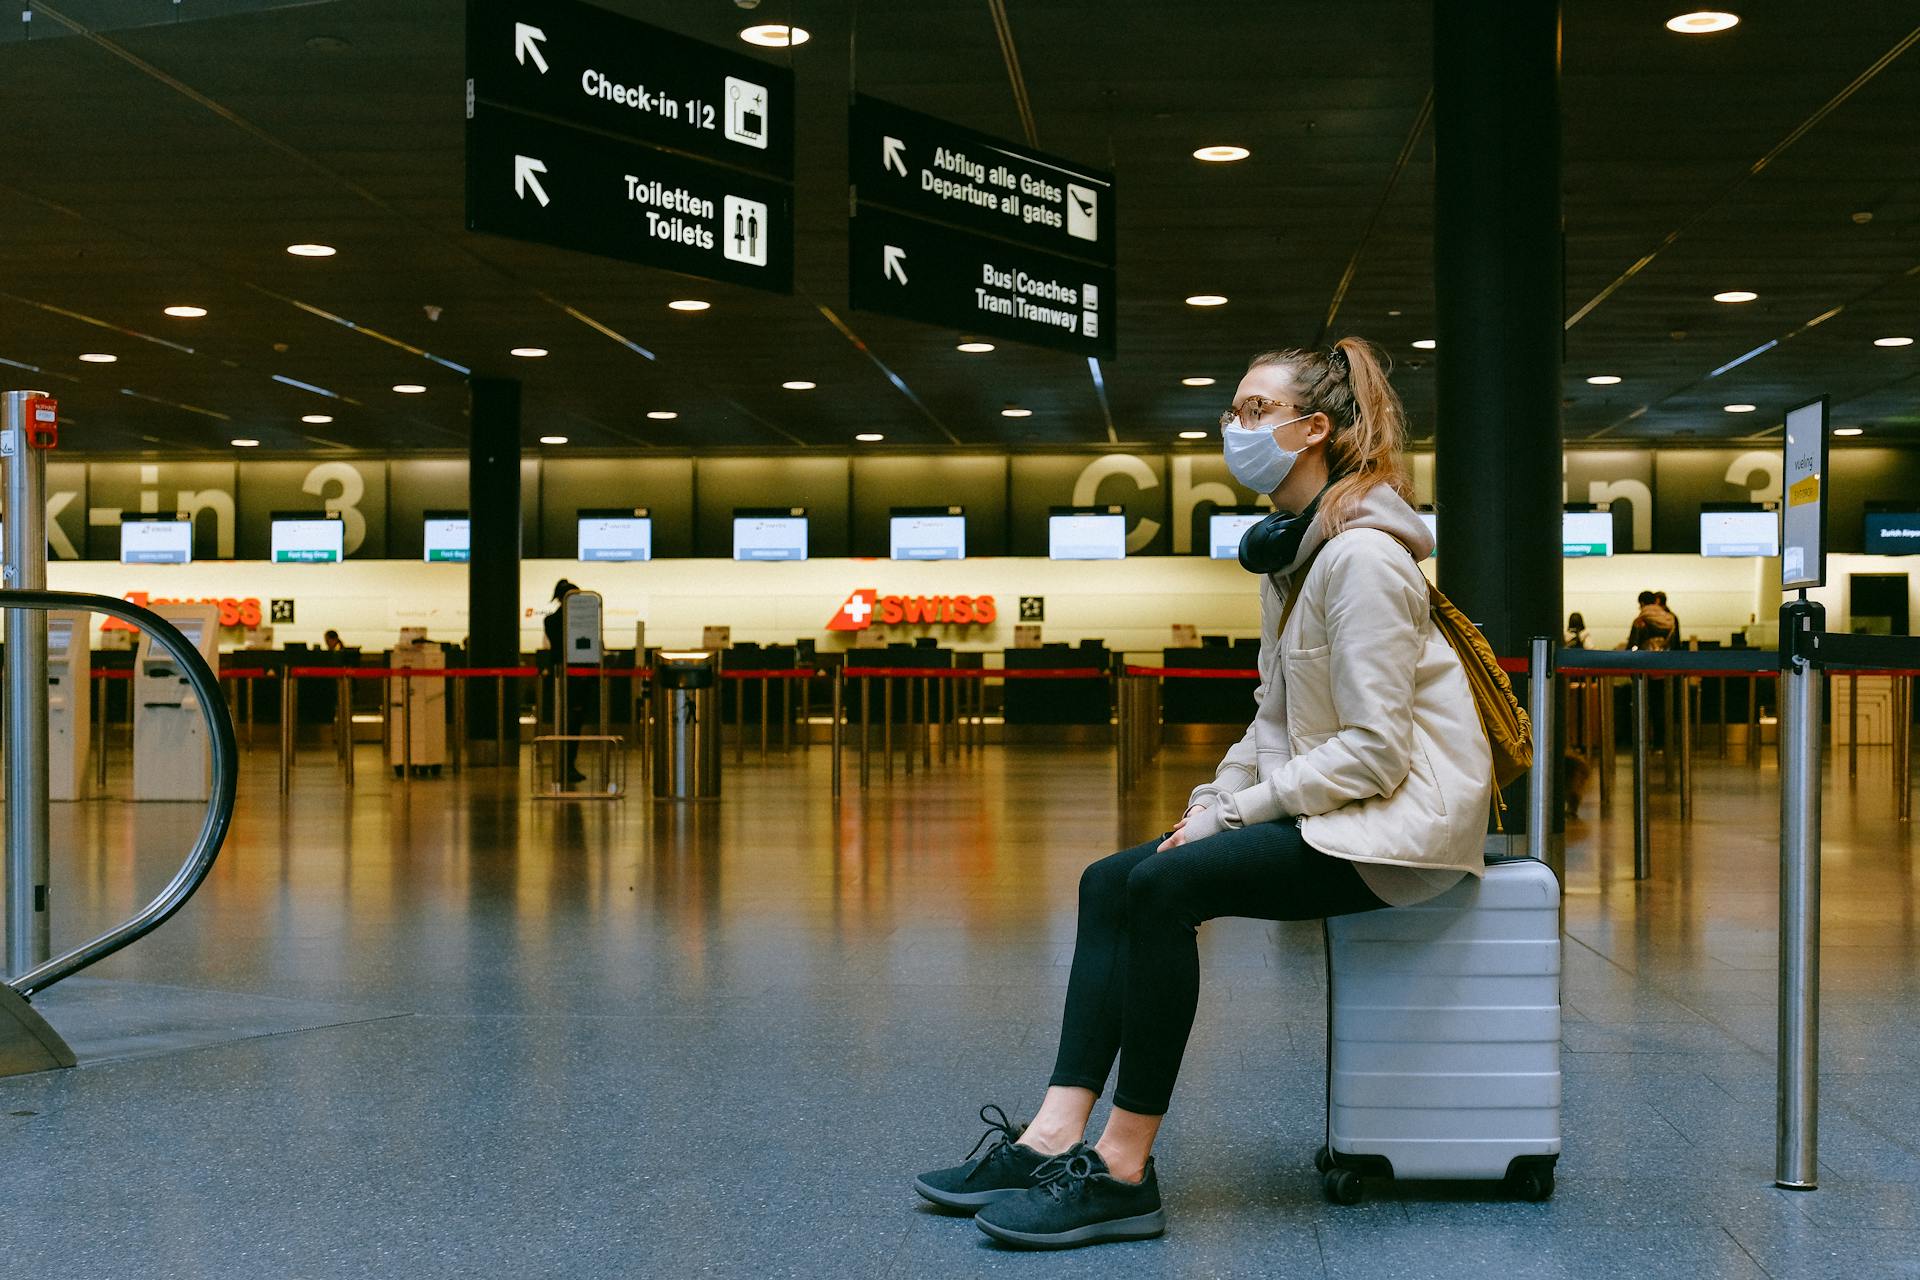 Woman sitting on a suitcase at an airport | Source: Pexels